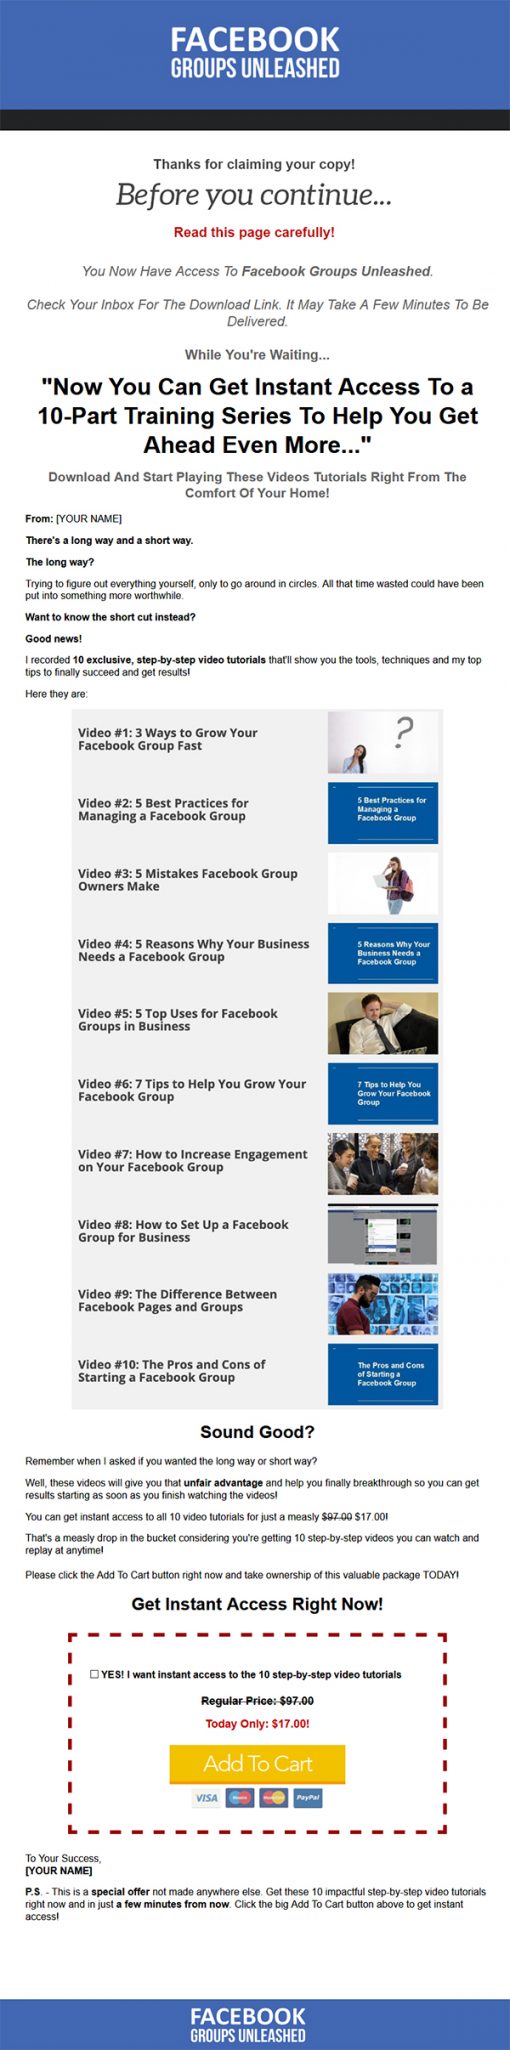 Facebook Groups Unleashed Ebook and Videos MRR